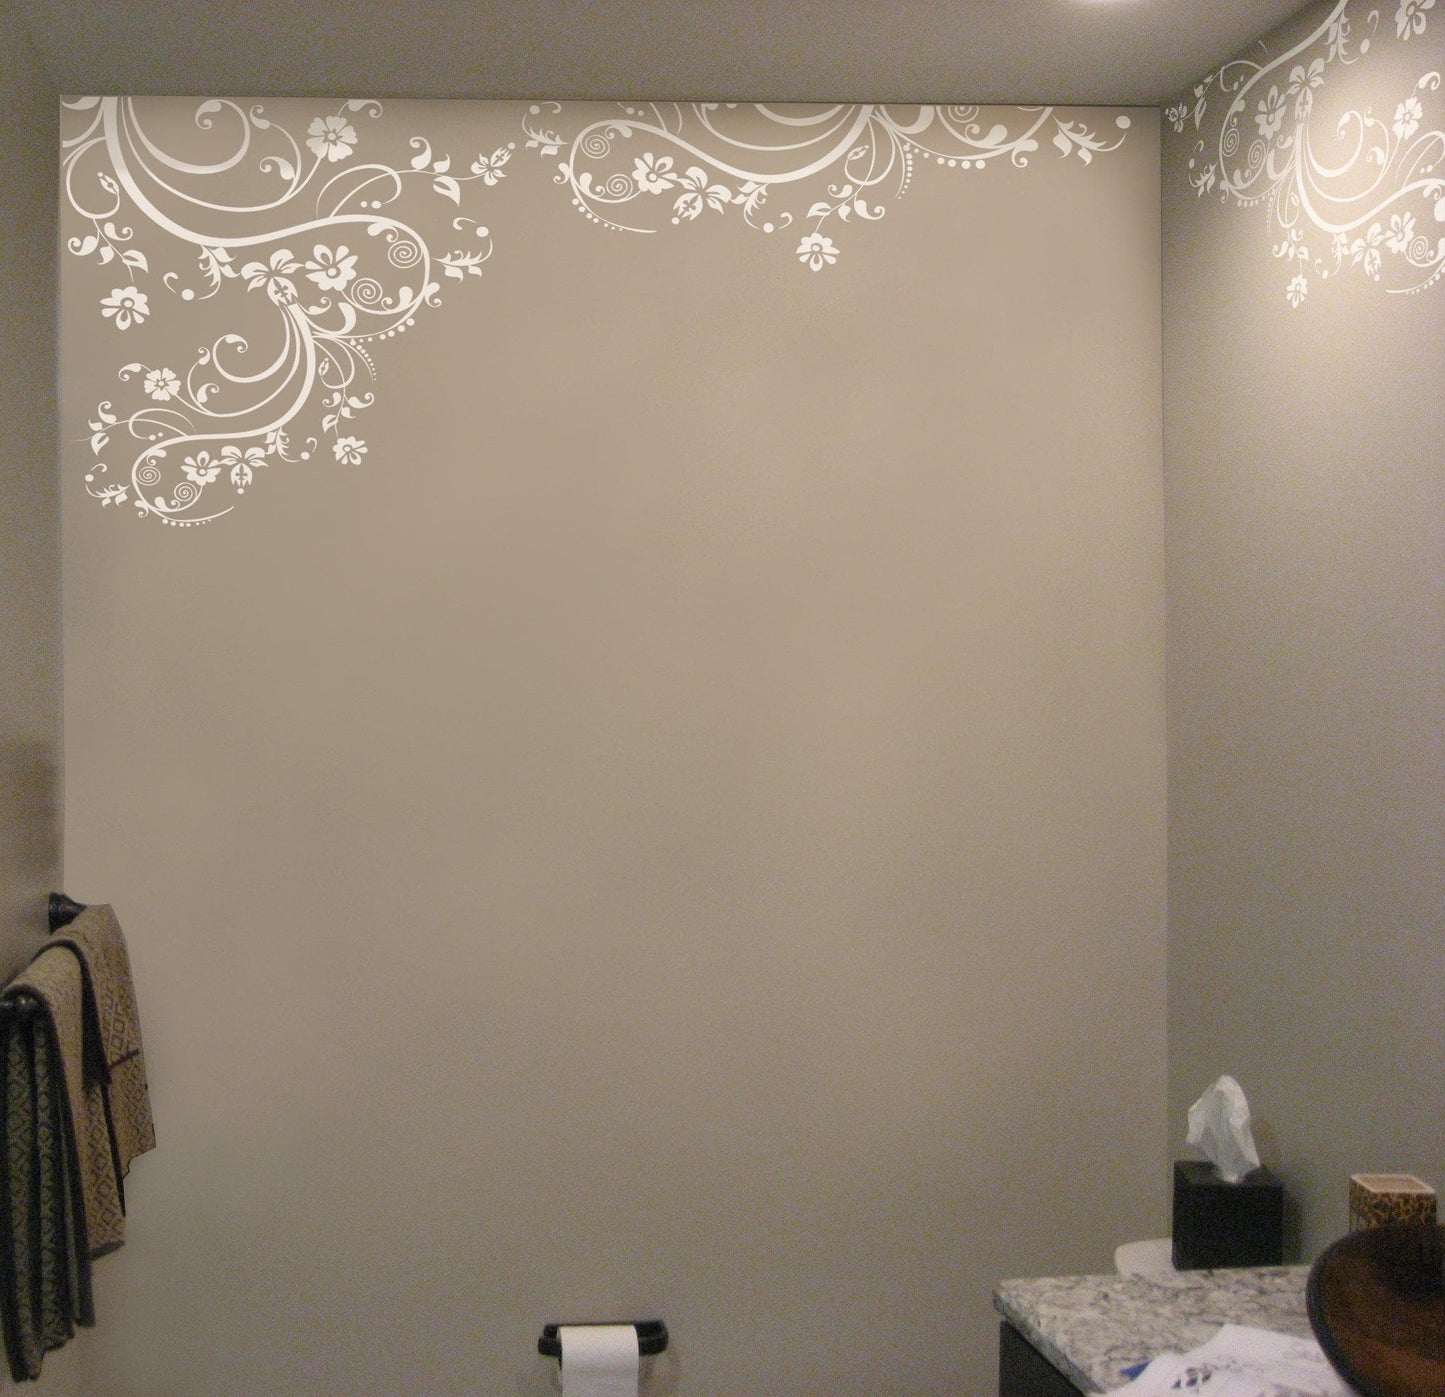 White swirling floral decals on a dark wall in a bathroom.